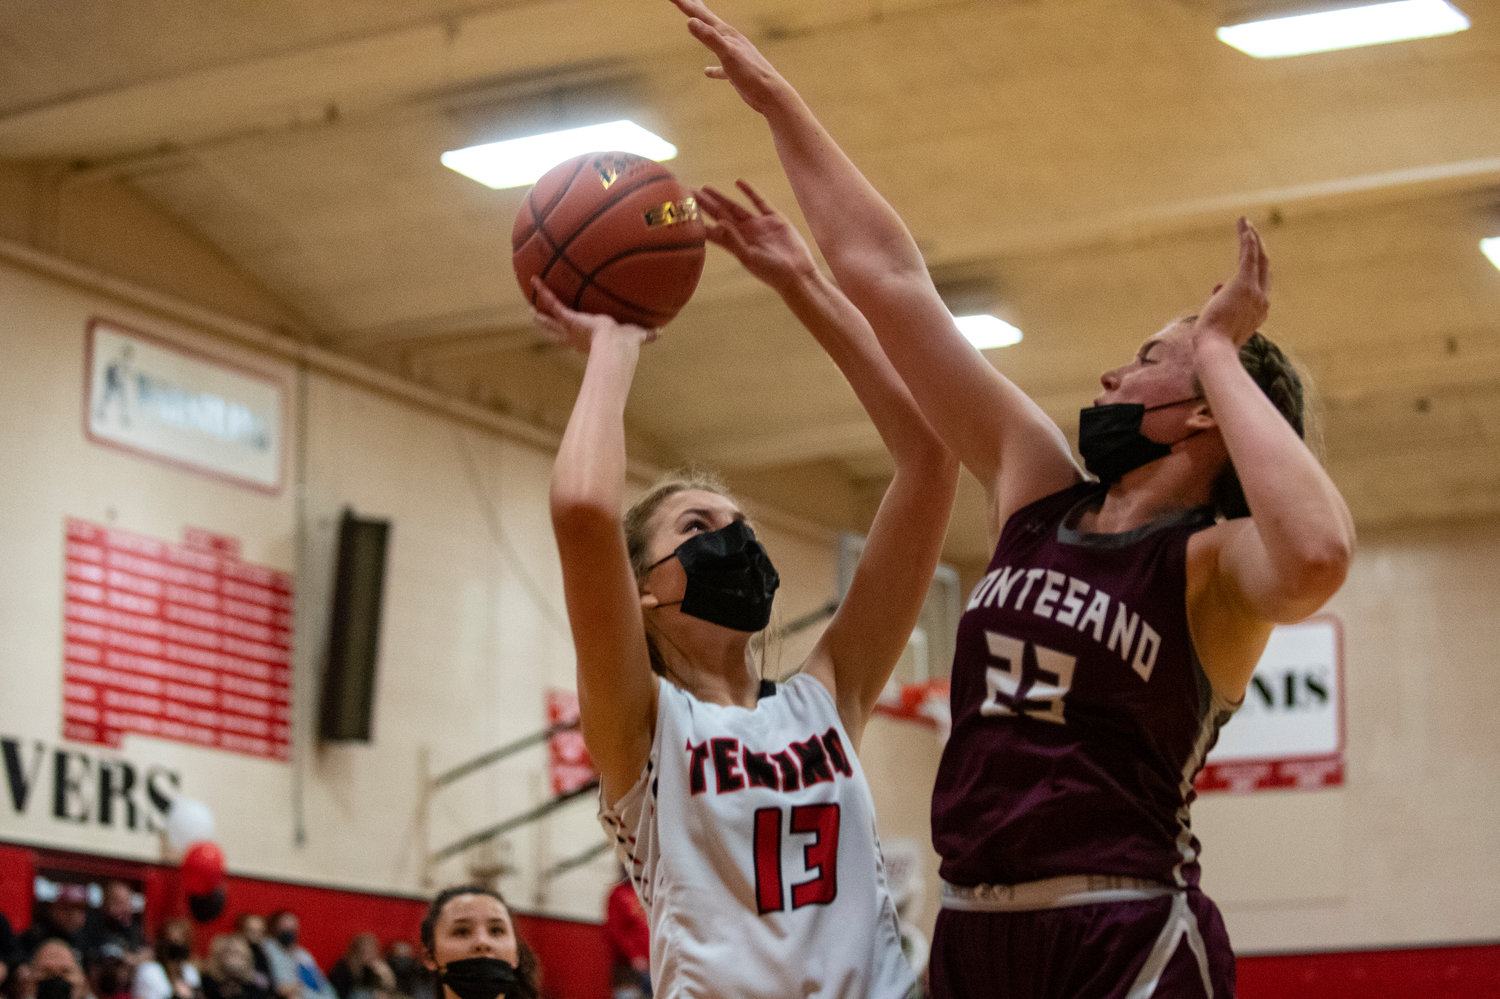 Tenino sophomore Rilee Jones (13) goes up for a shot in the paint against Montesano's Paige Lisherness (23) on Thursday.